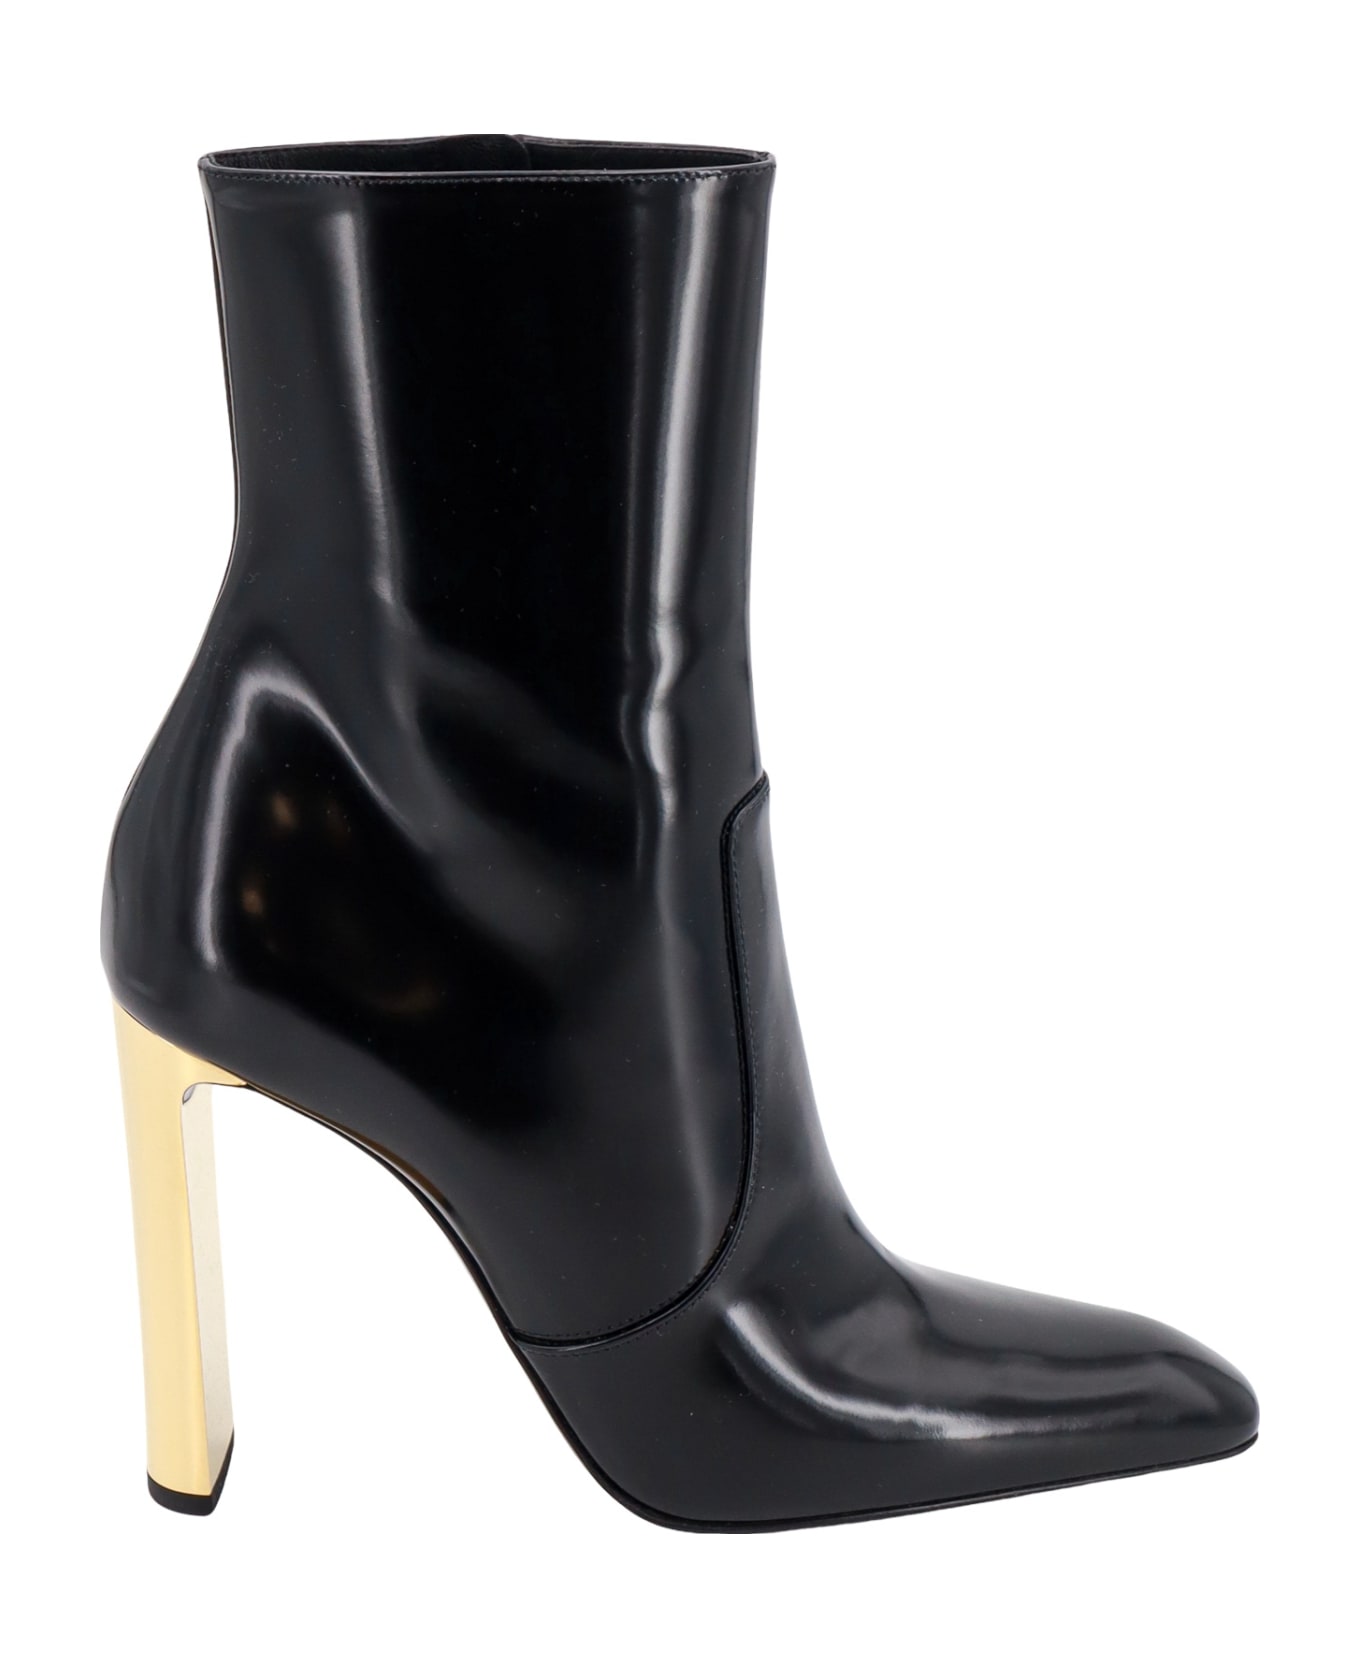 Saint Laurent Ankle Boot In Glazed Leather And Gold Heel - Black ブーツ